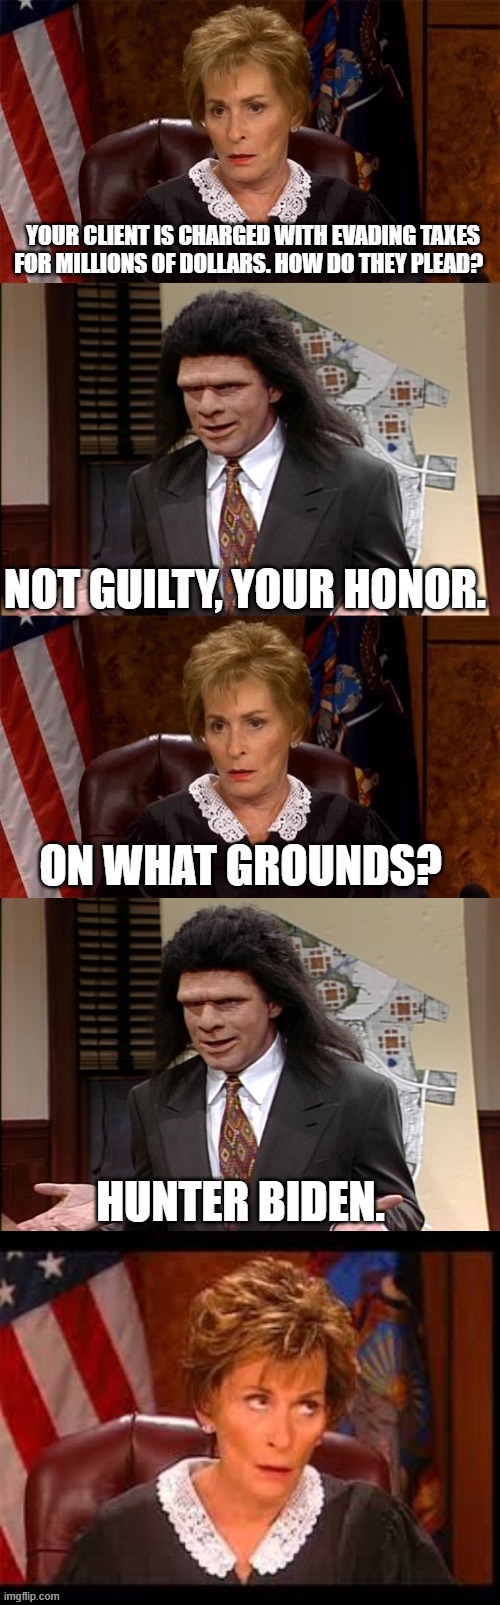 Judge v Lawyer | YOUR CLIENT IS CHARGED WITH EVADING TAXES FOR MILLIONS OF DOLLARS. HOW DO THEY PLEAD? NOT GUILTY, YOUR HONOR. ON WHAT GROUNDS? HUNTER BIDEN. | image tagged in judge v lawyer | made w/ Imgflip meme maker